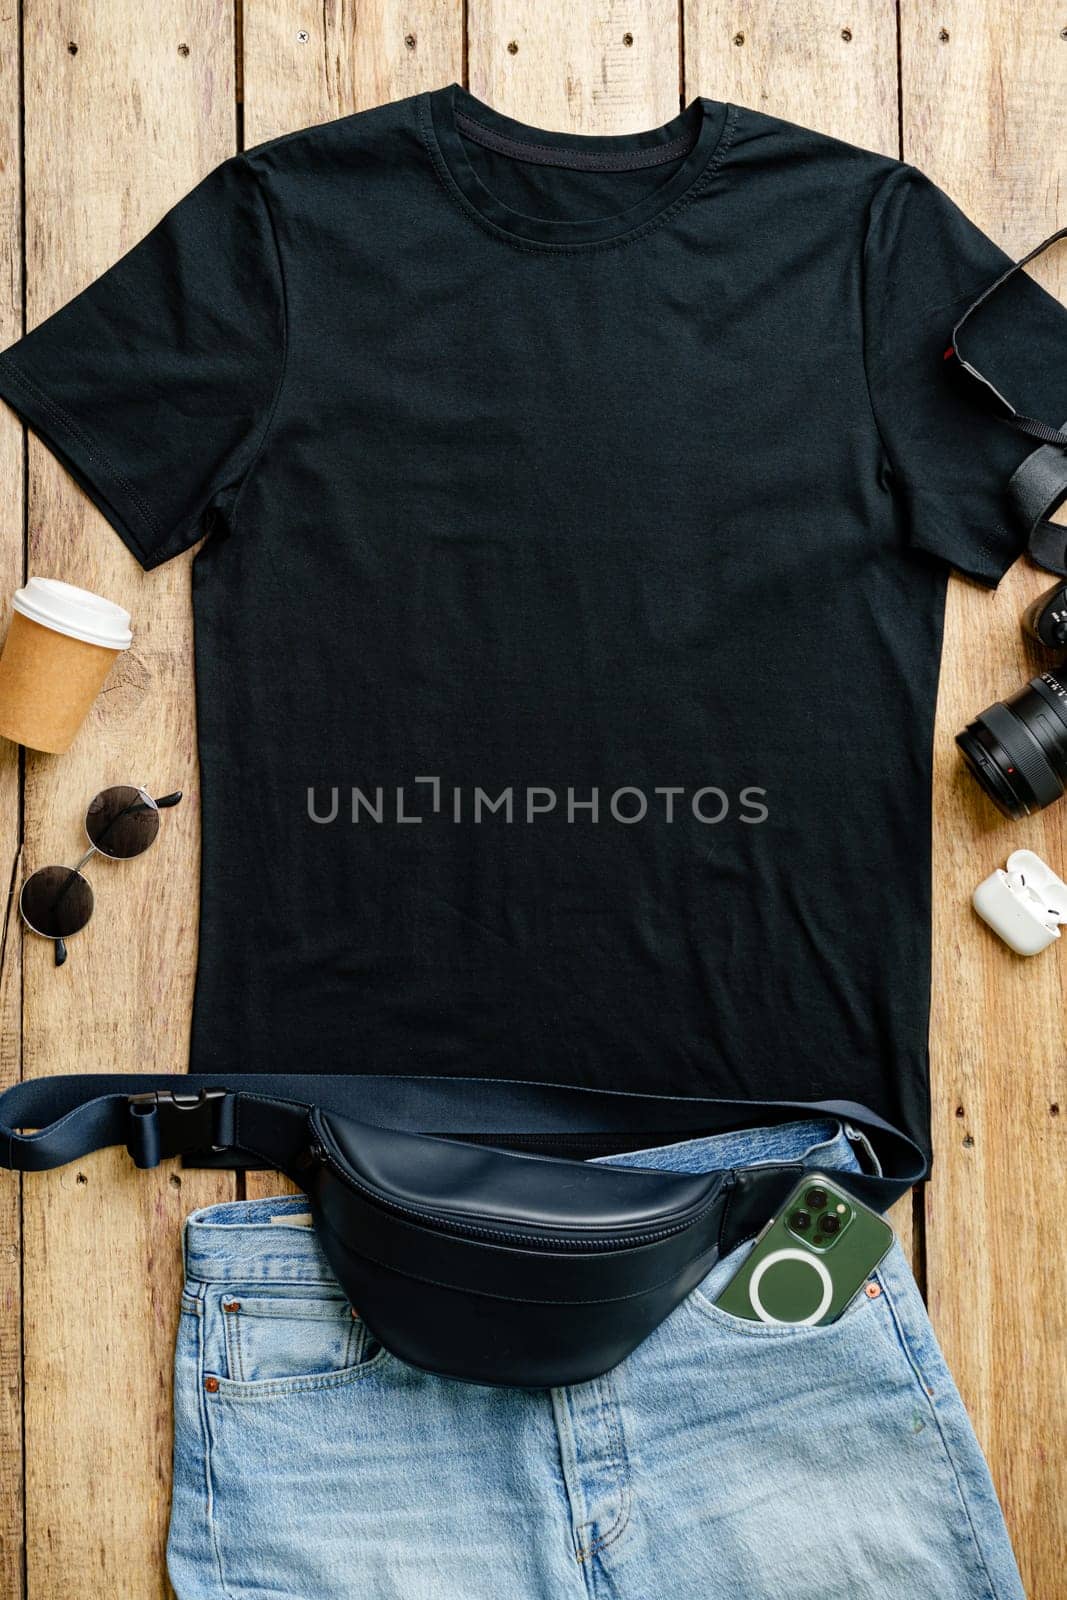 T-shirt with jeans shorts placed on the wooden background top view